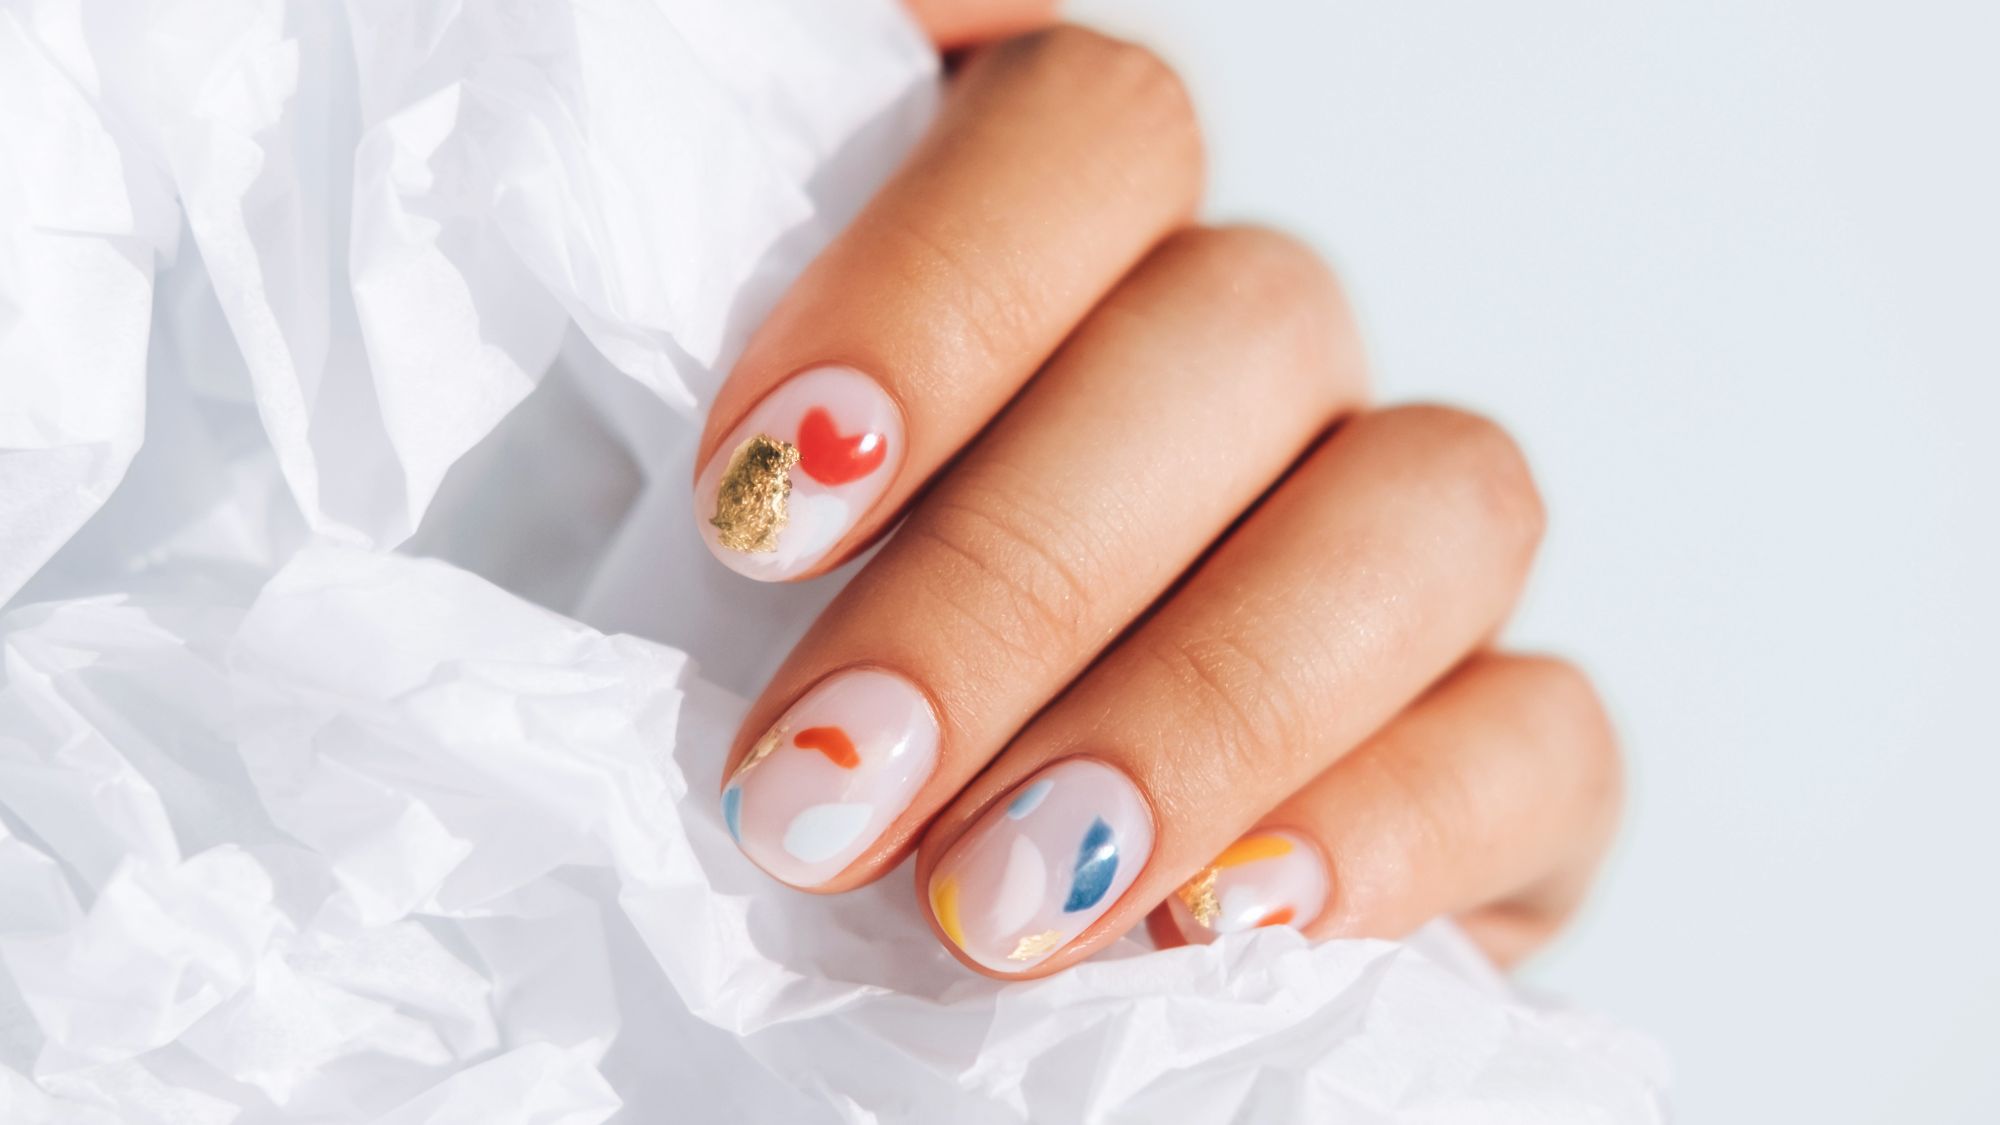 How to Use a Needle for Cool Nail Art Designs « Nails & Manicure ::  WonderHowTo